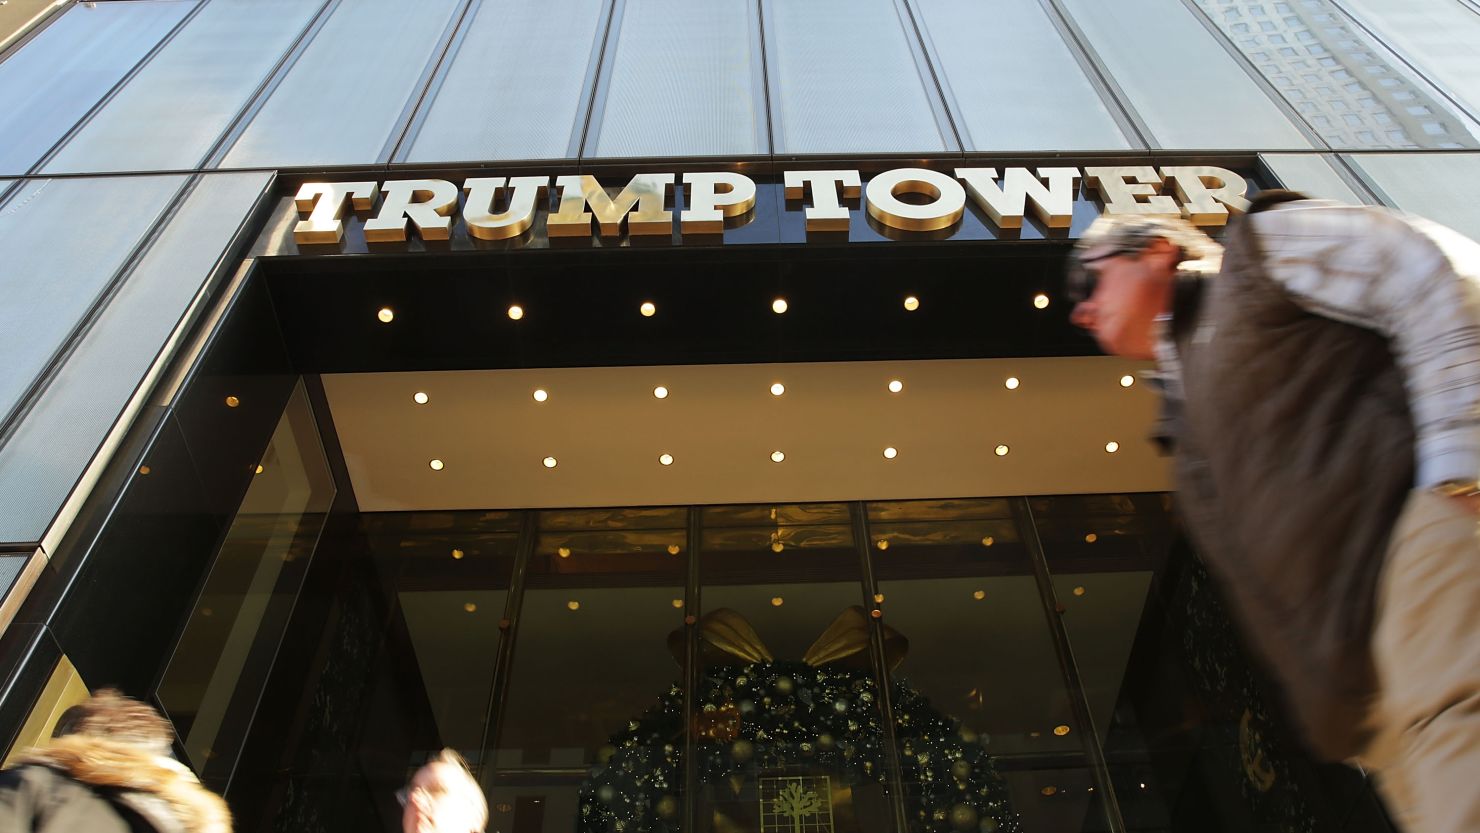 People walk by the Trump Tower in Midtown Manhattan on December 8, 2015 in New York City. Donald Trumps latest incendiary remarks concerning Muslims has led to criticism across the nation, including many of his fellow GOP presidential candidates.